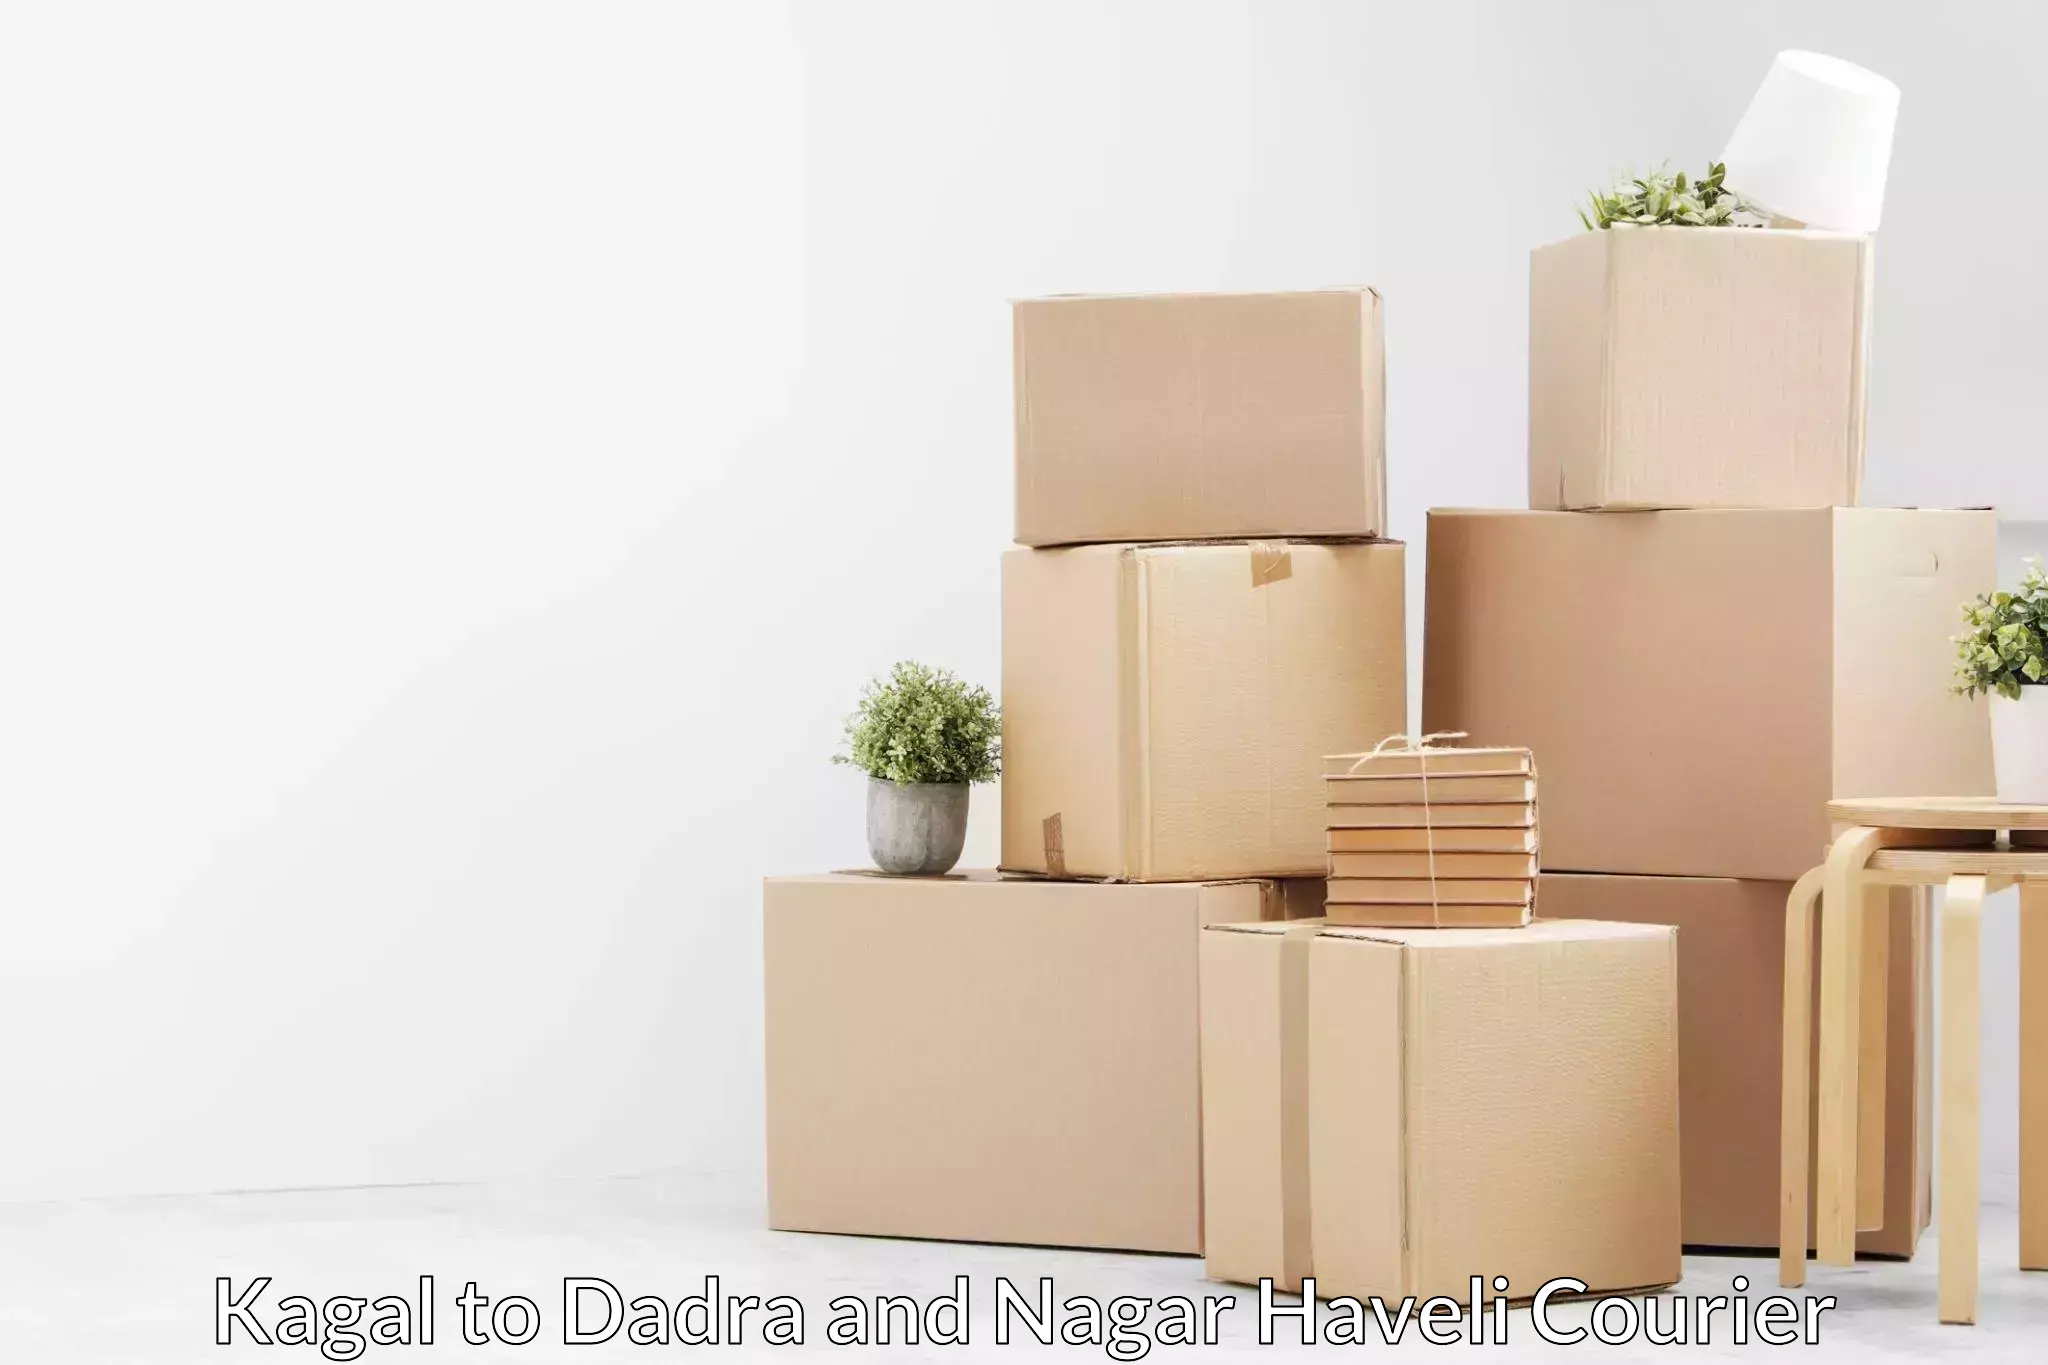 Quality relocation assistance Kagal to Dadra and Nagar Haveli